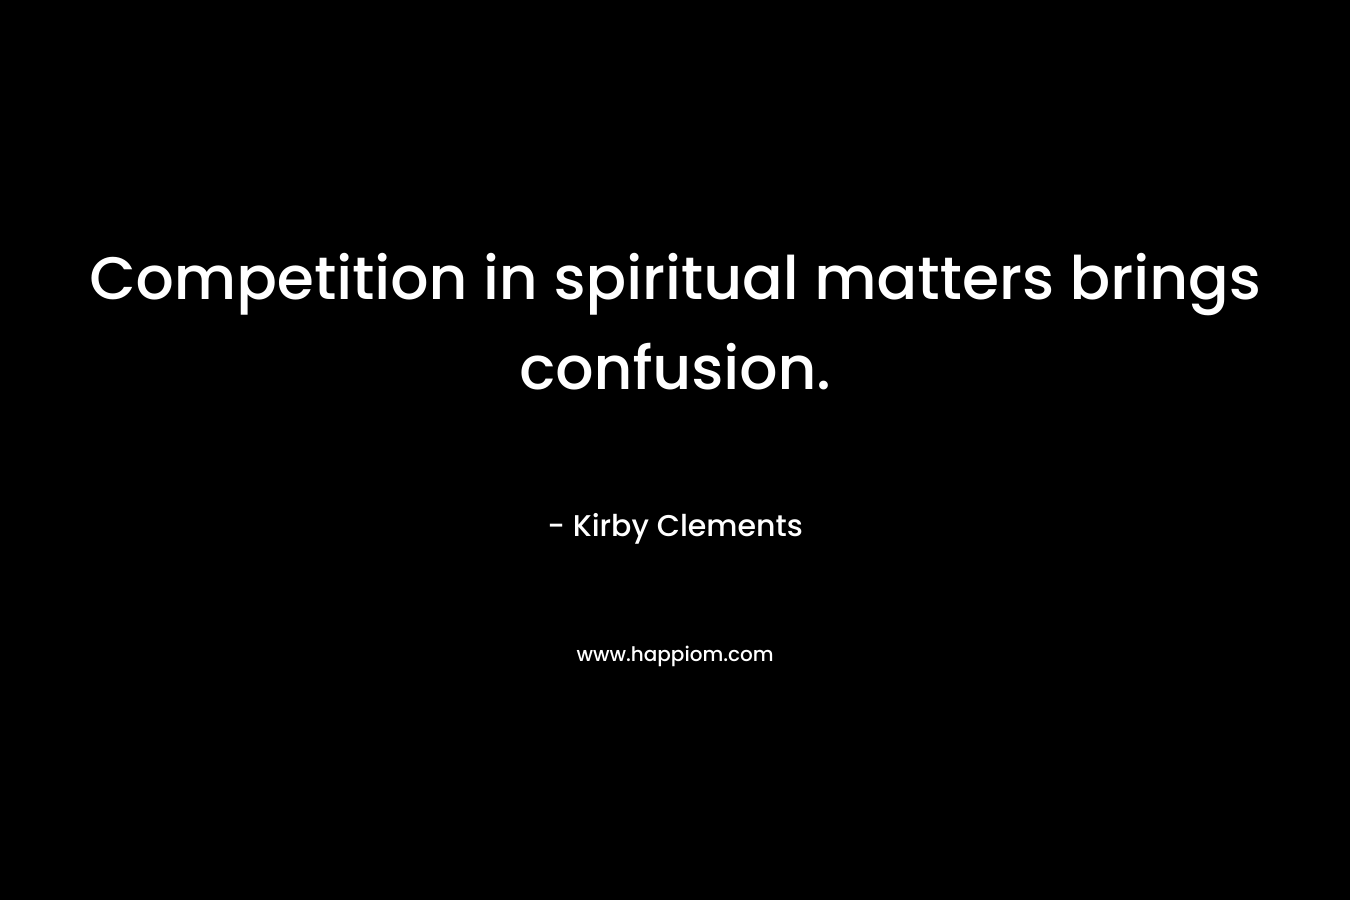 Competition in spiritual matters brings confusion.